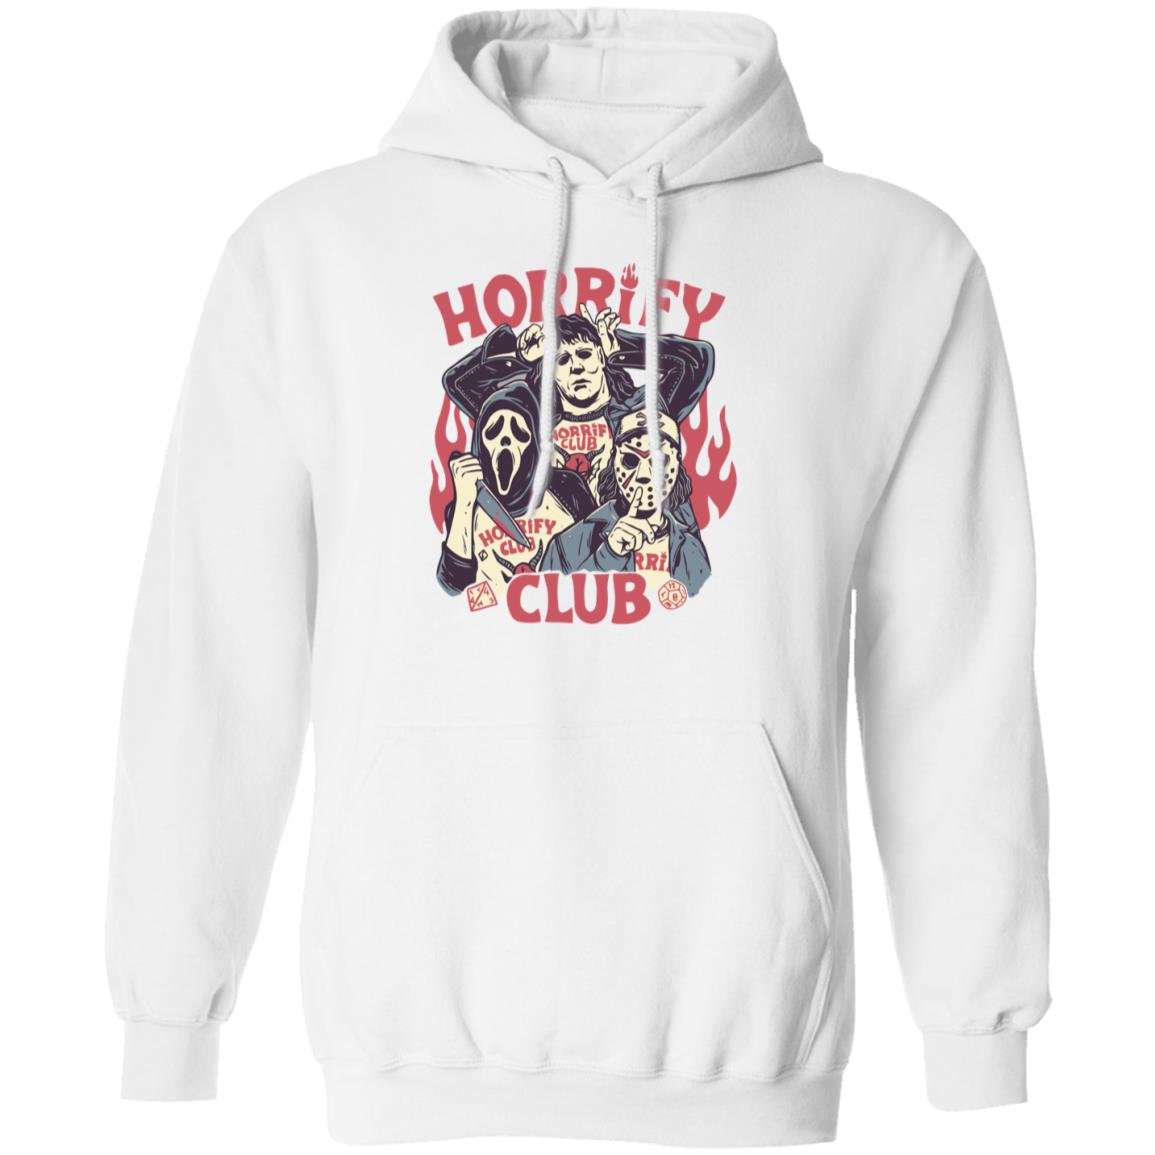 Horror Character Horrify Club Shirt Panetory – Graphic Design Apparel &Amp; Accessories Online